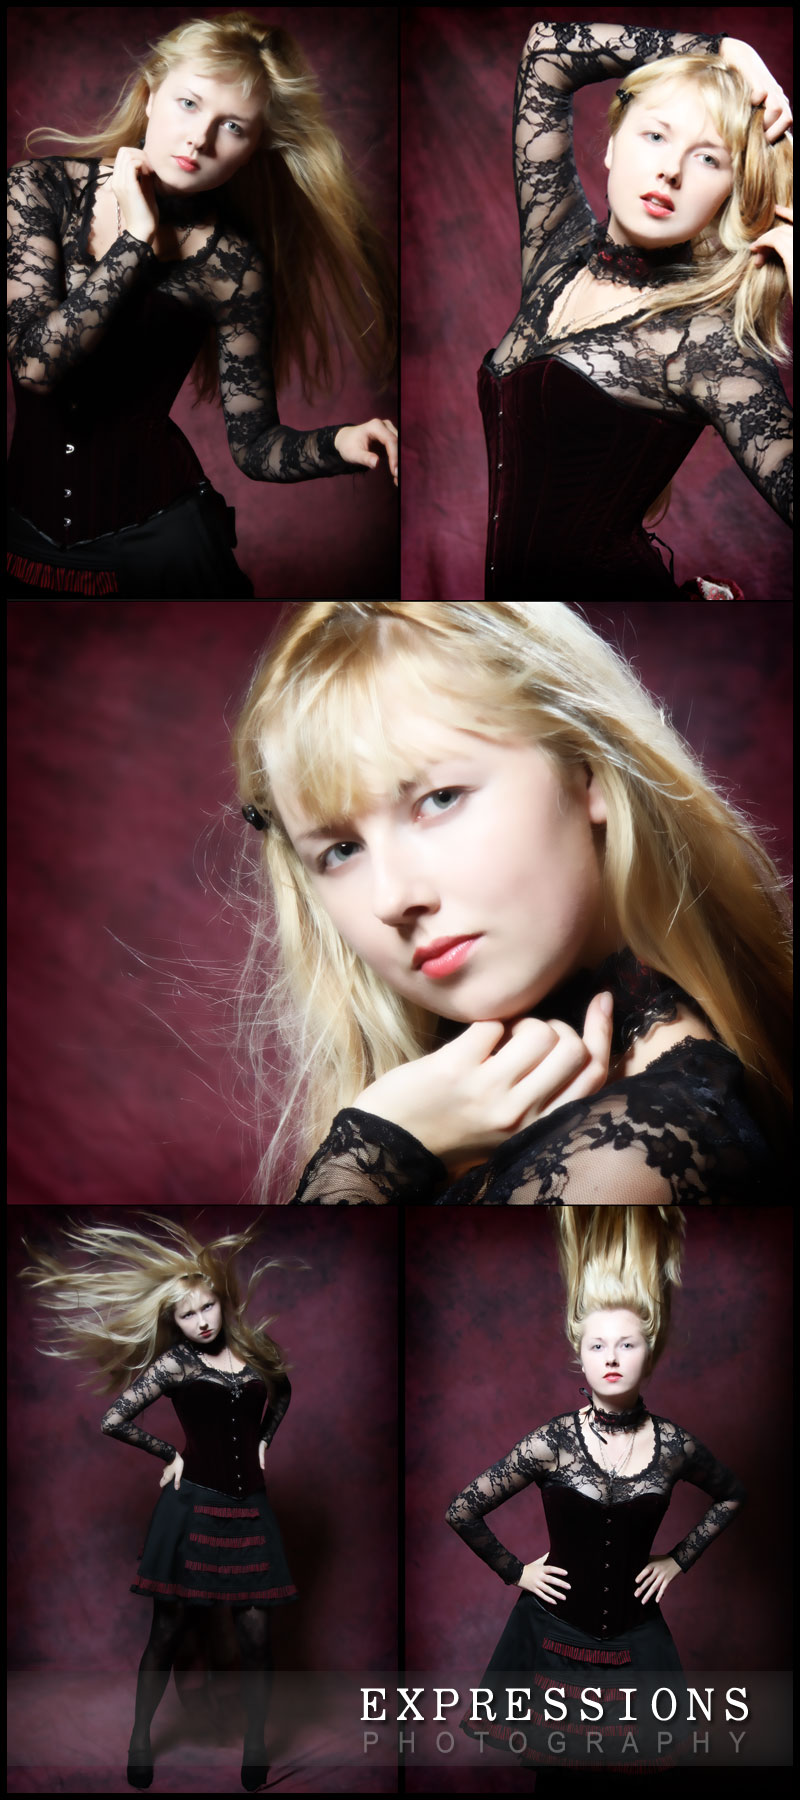 Male and Female model photo shoot of Expressions Photography and VladiSlava in Studio